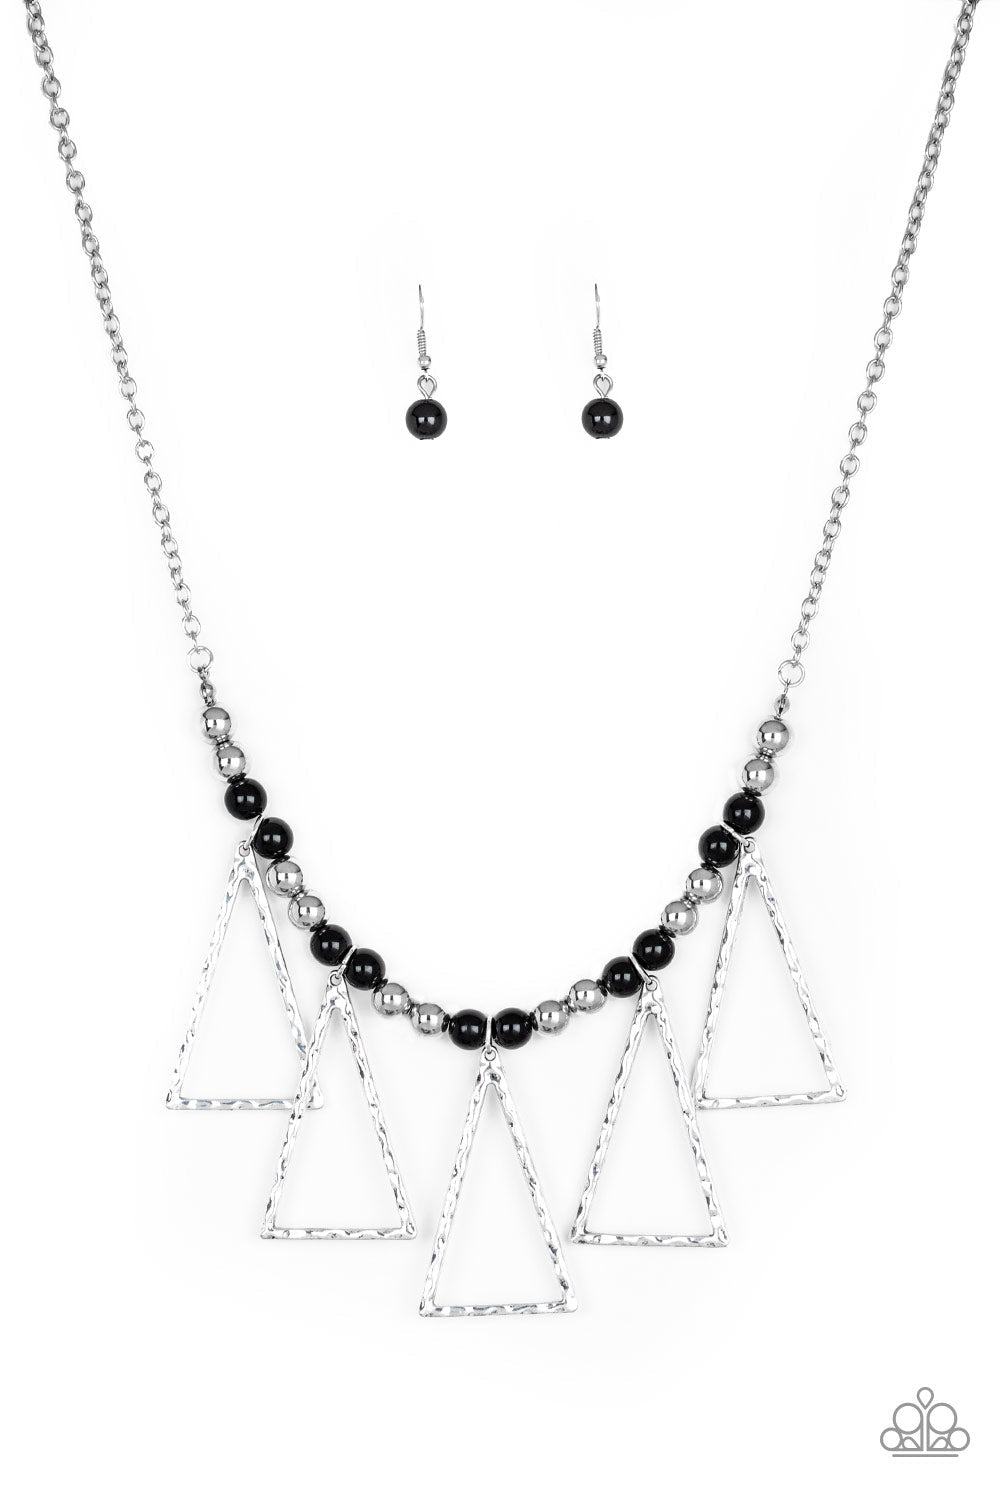 Terra Nouveau - Black and Silver Fashion Necklace - Paparazzi Accessories - A collection of shiny silver and refreshing black beads are threaded along an invisible wire below the collar. Hammered triangular frames swing from the bottom of the colorful compilation, creating an artistic fringe. Features an adjustable clasp closure. 